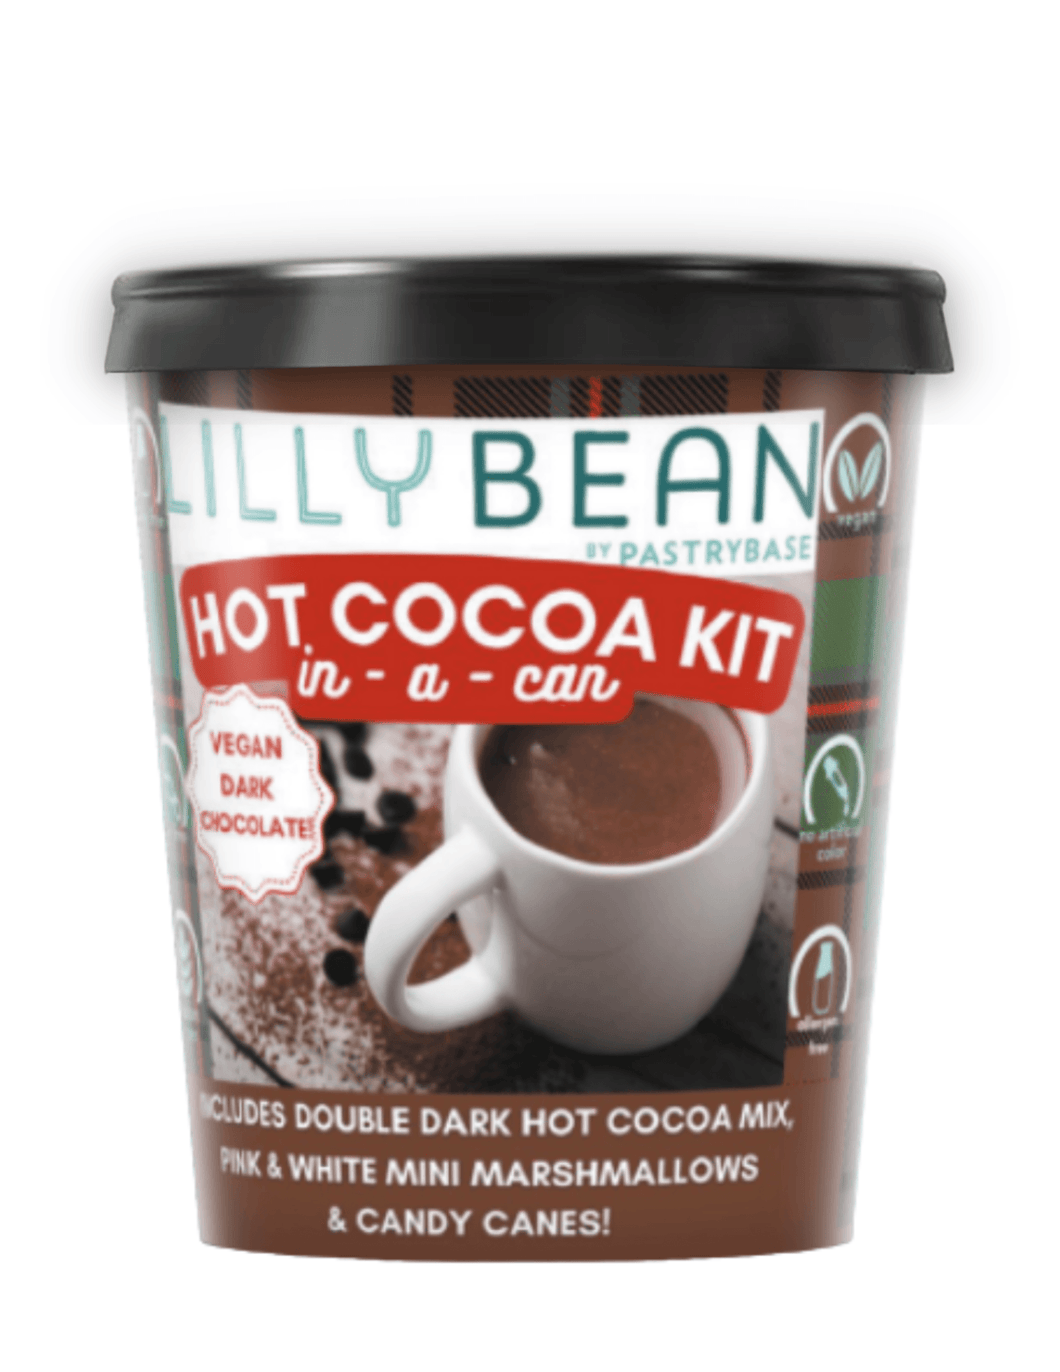 NEW!  Double Dark Hot Cocoa Kit in a Cup